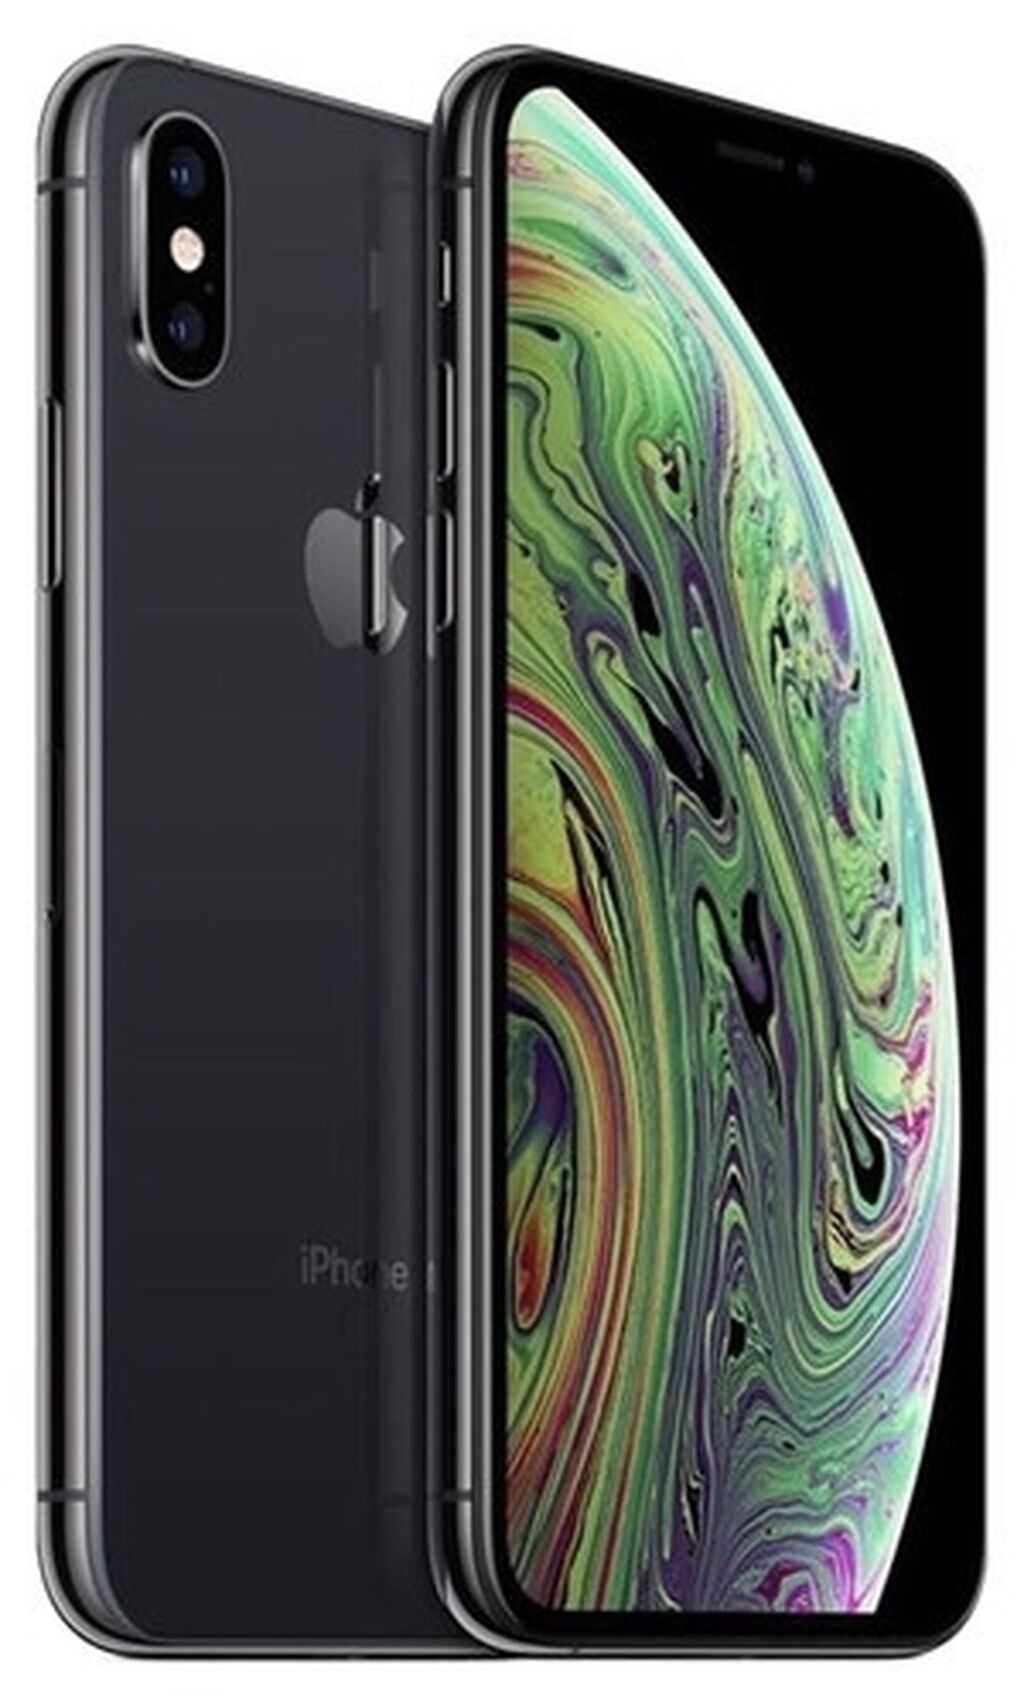 Iphone XS Max Space Gray 256 GB